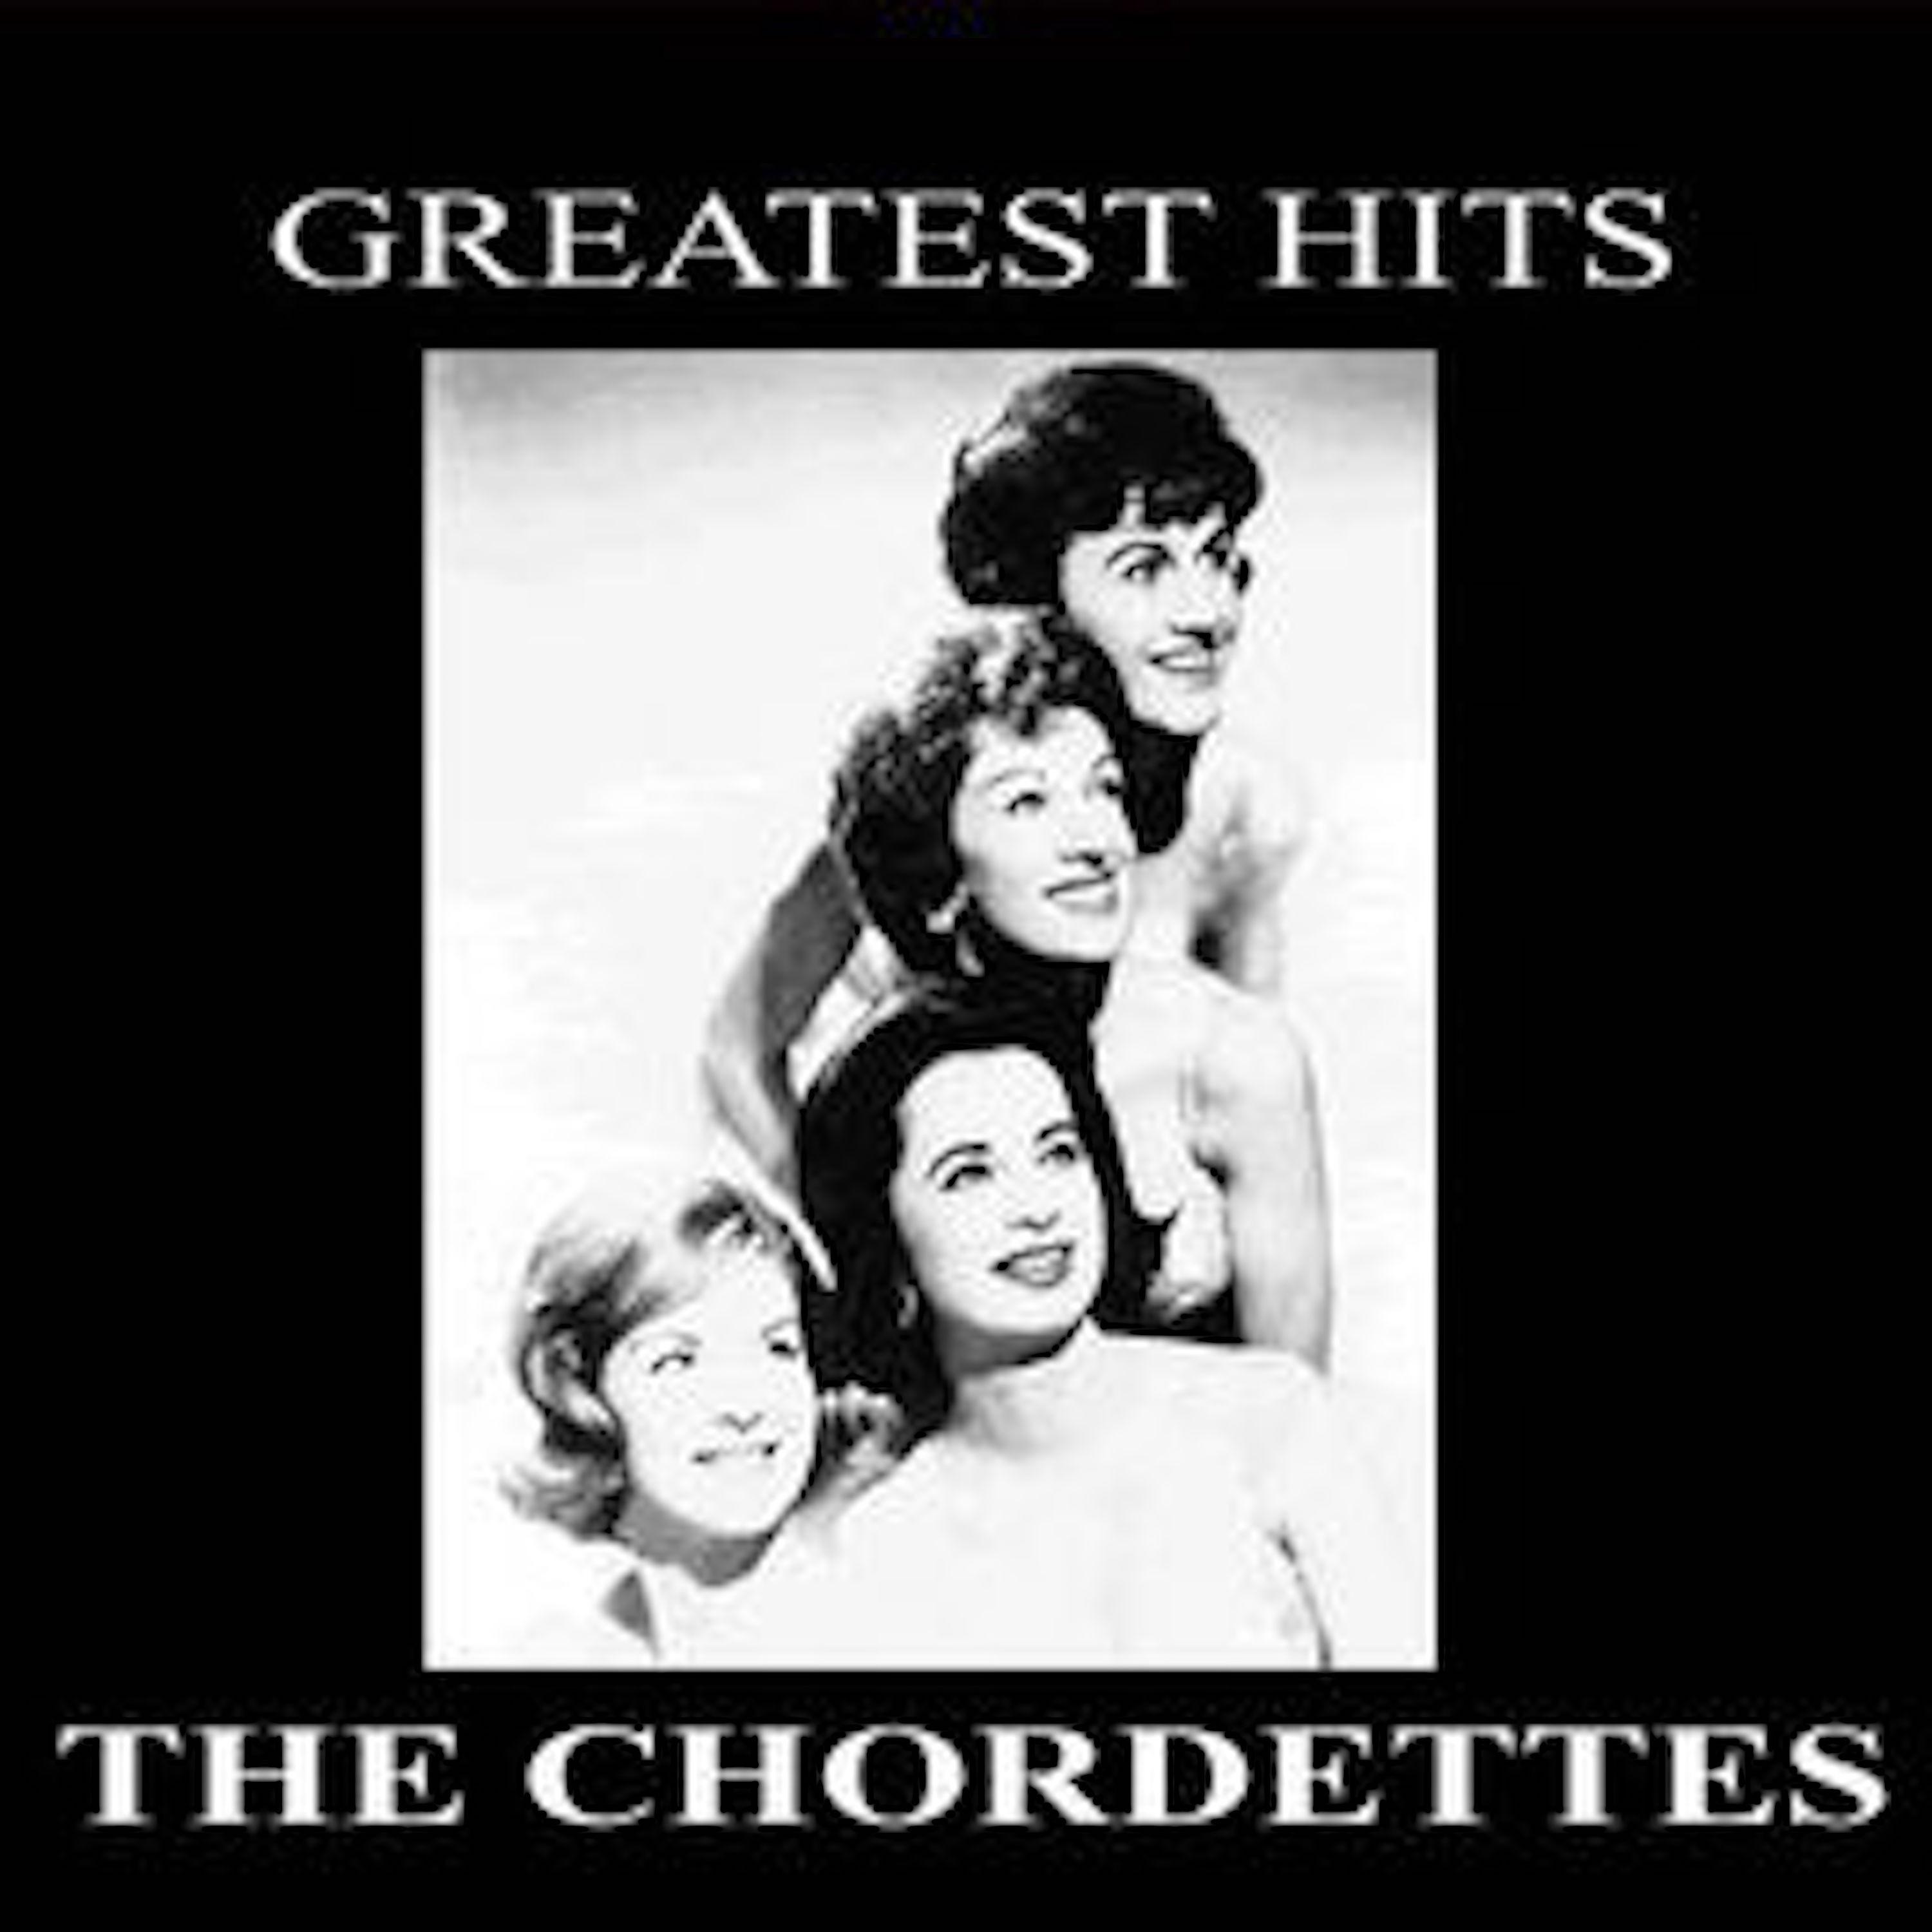 The Chordettes - No Wheels